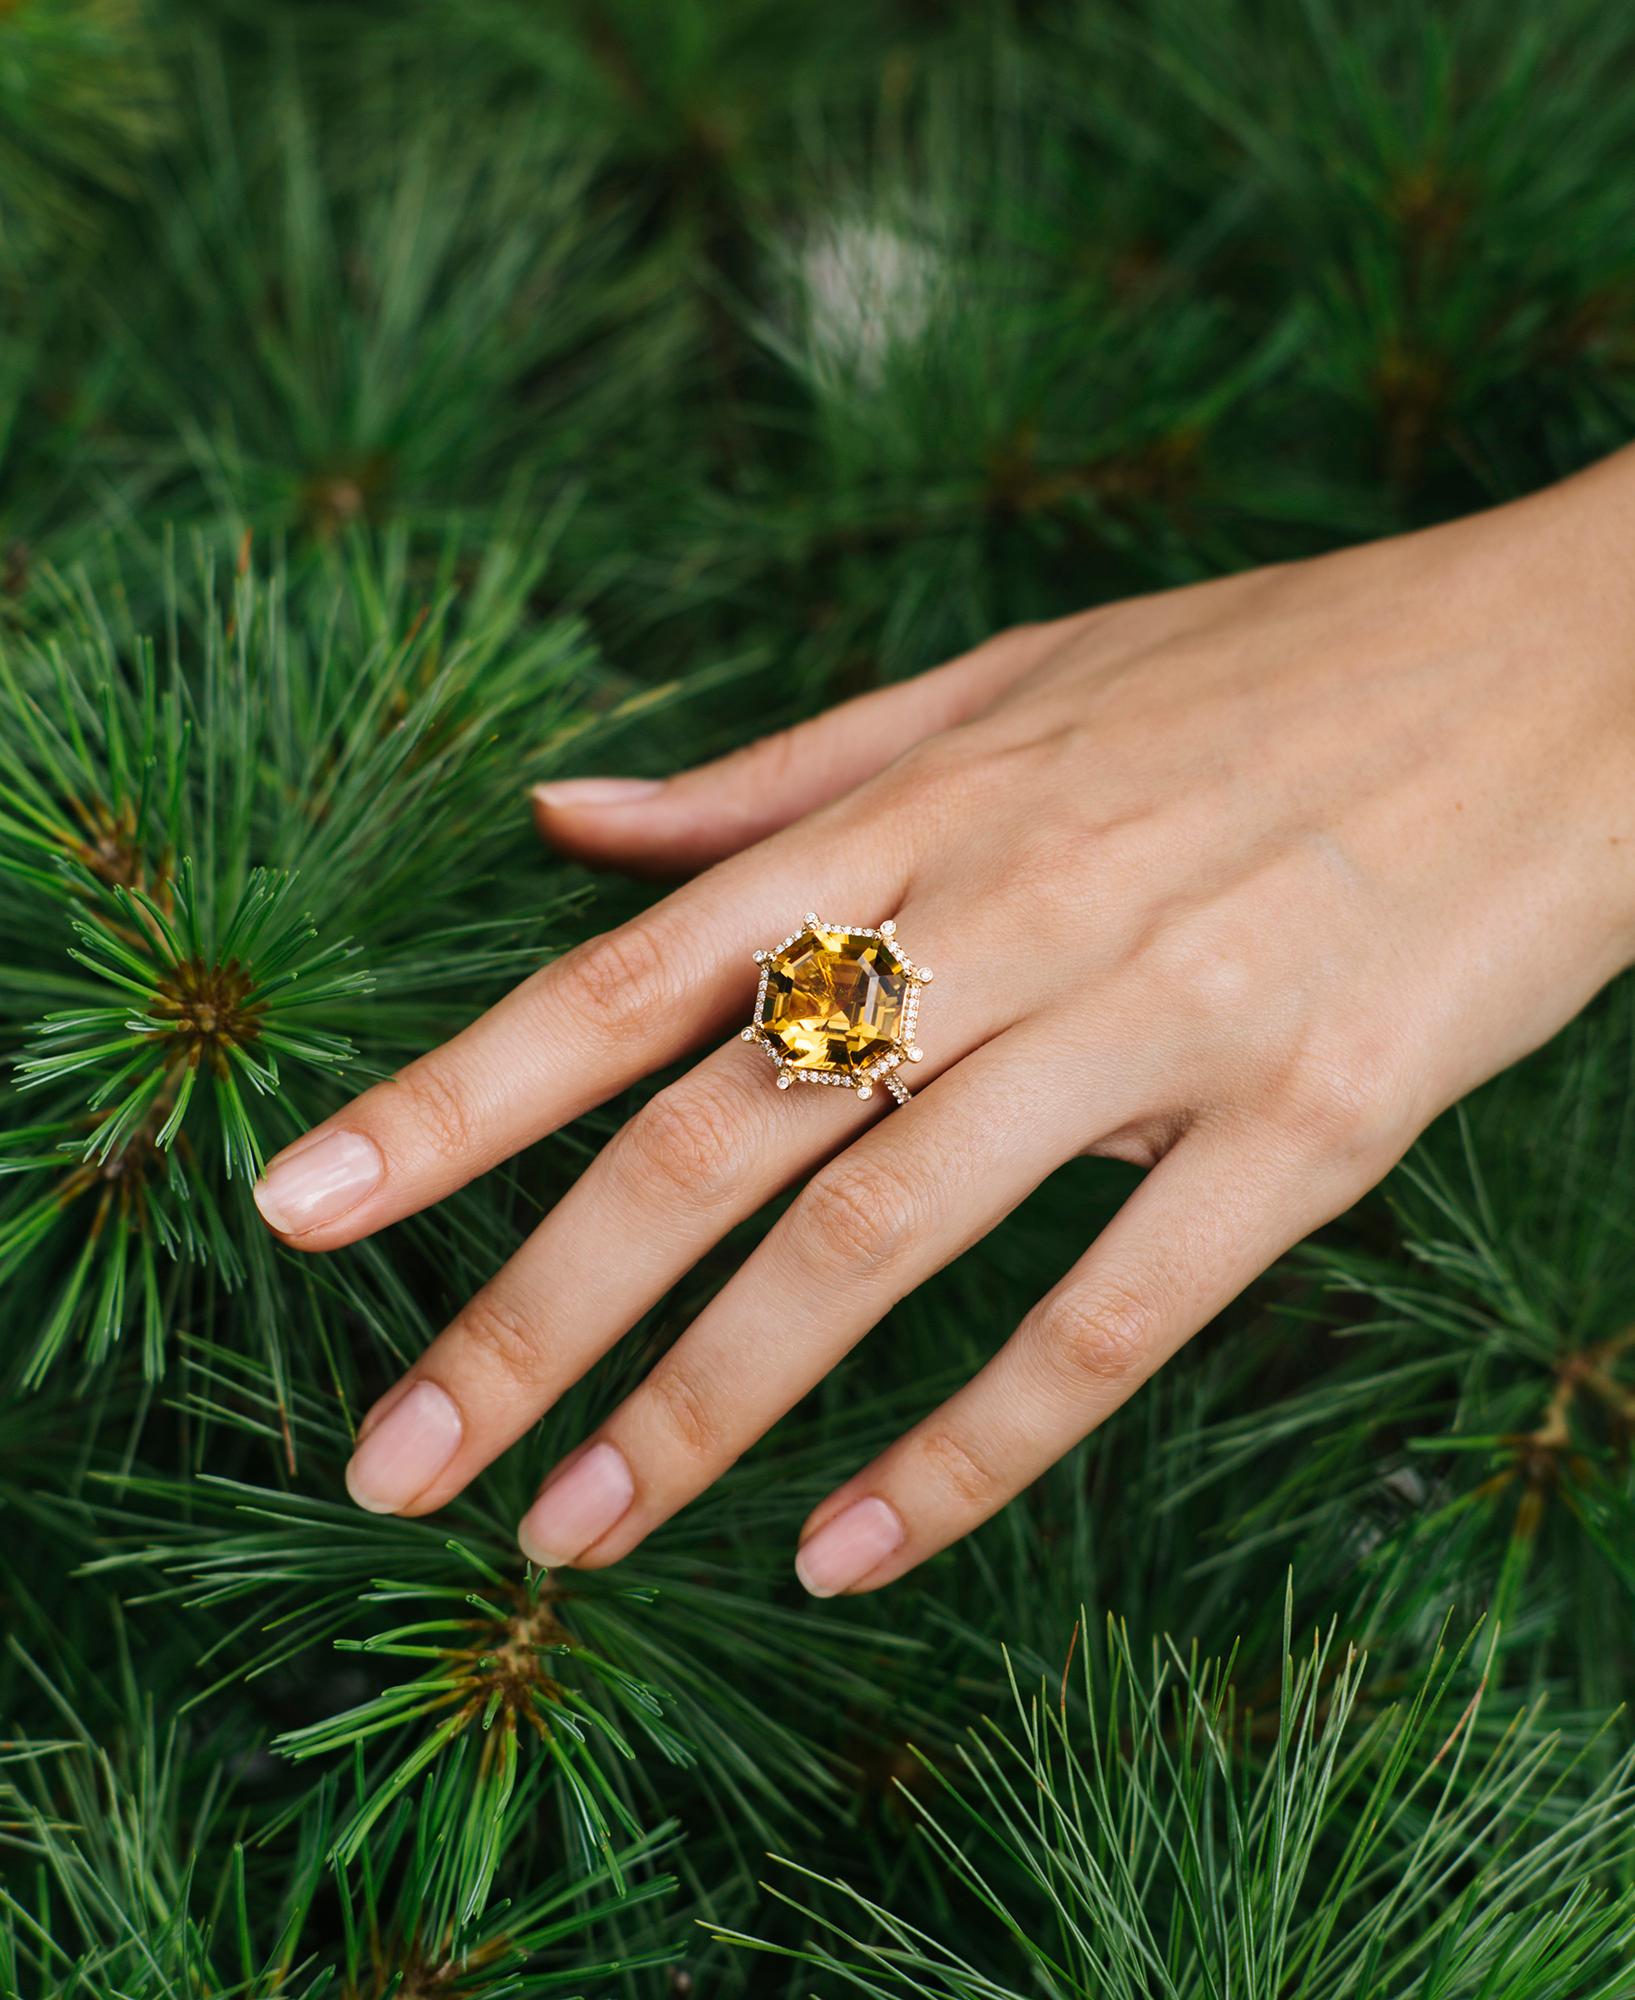 Large Citrine Octagon Ring in 18K Yellow Gold with Diamonds, from 'Gossip' Collection. Like any good piece of gossip, this collection carries a hint of shock value. They will have everyone in suspense about what Goshwara will do next.

* Gemstone